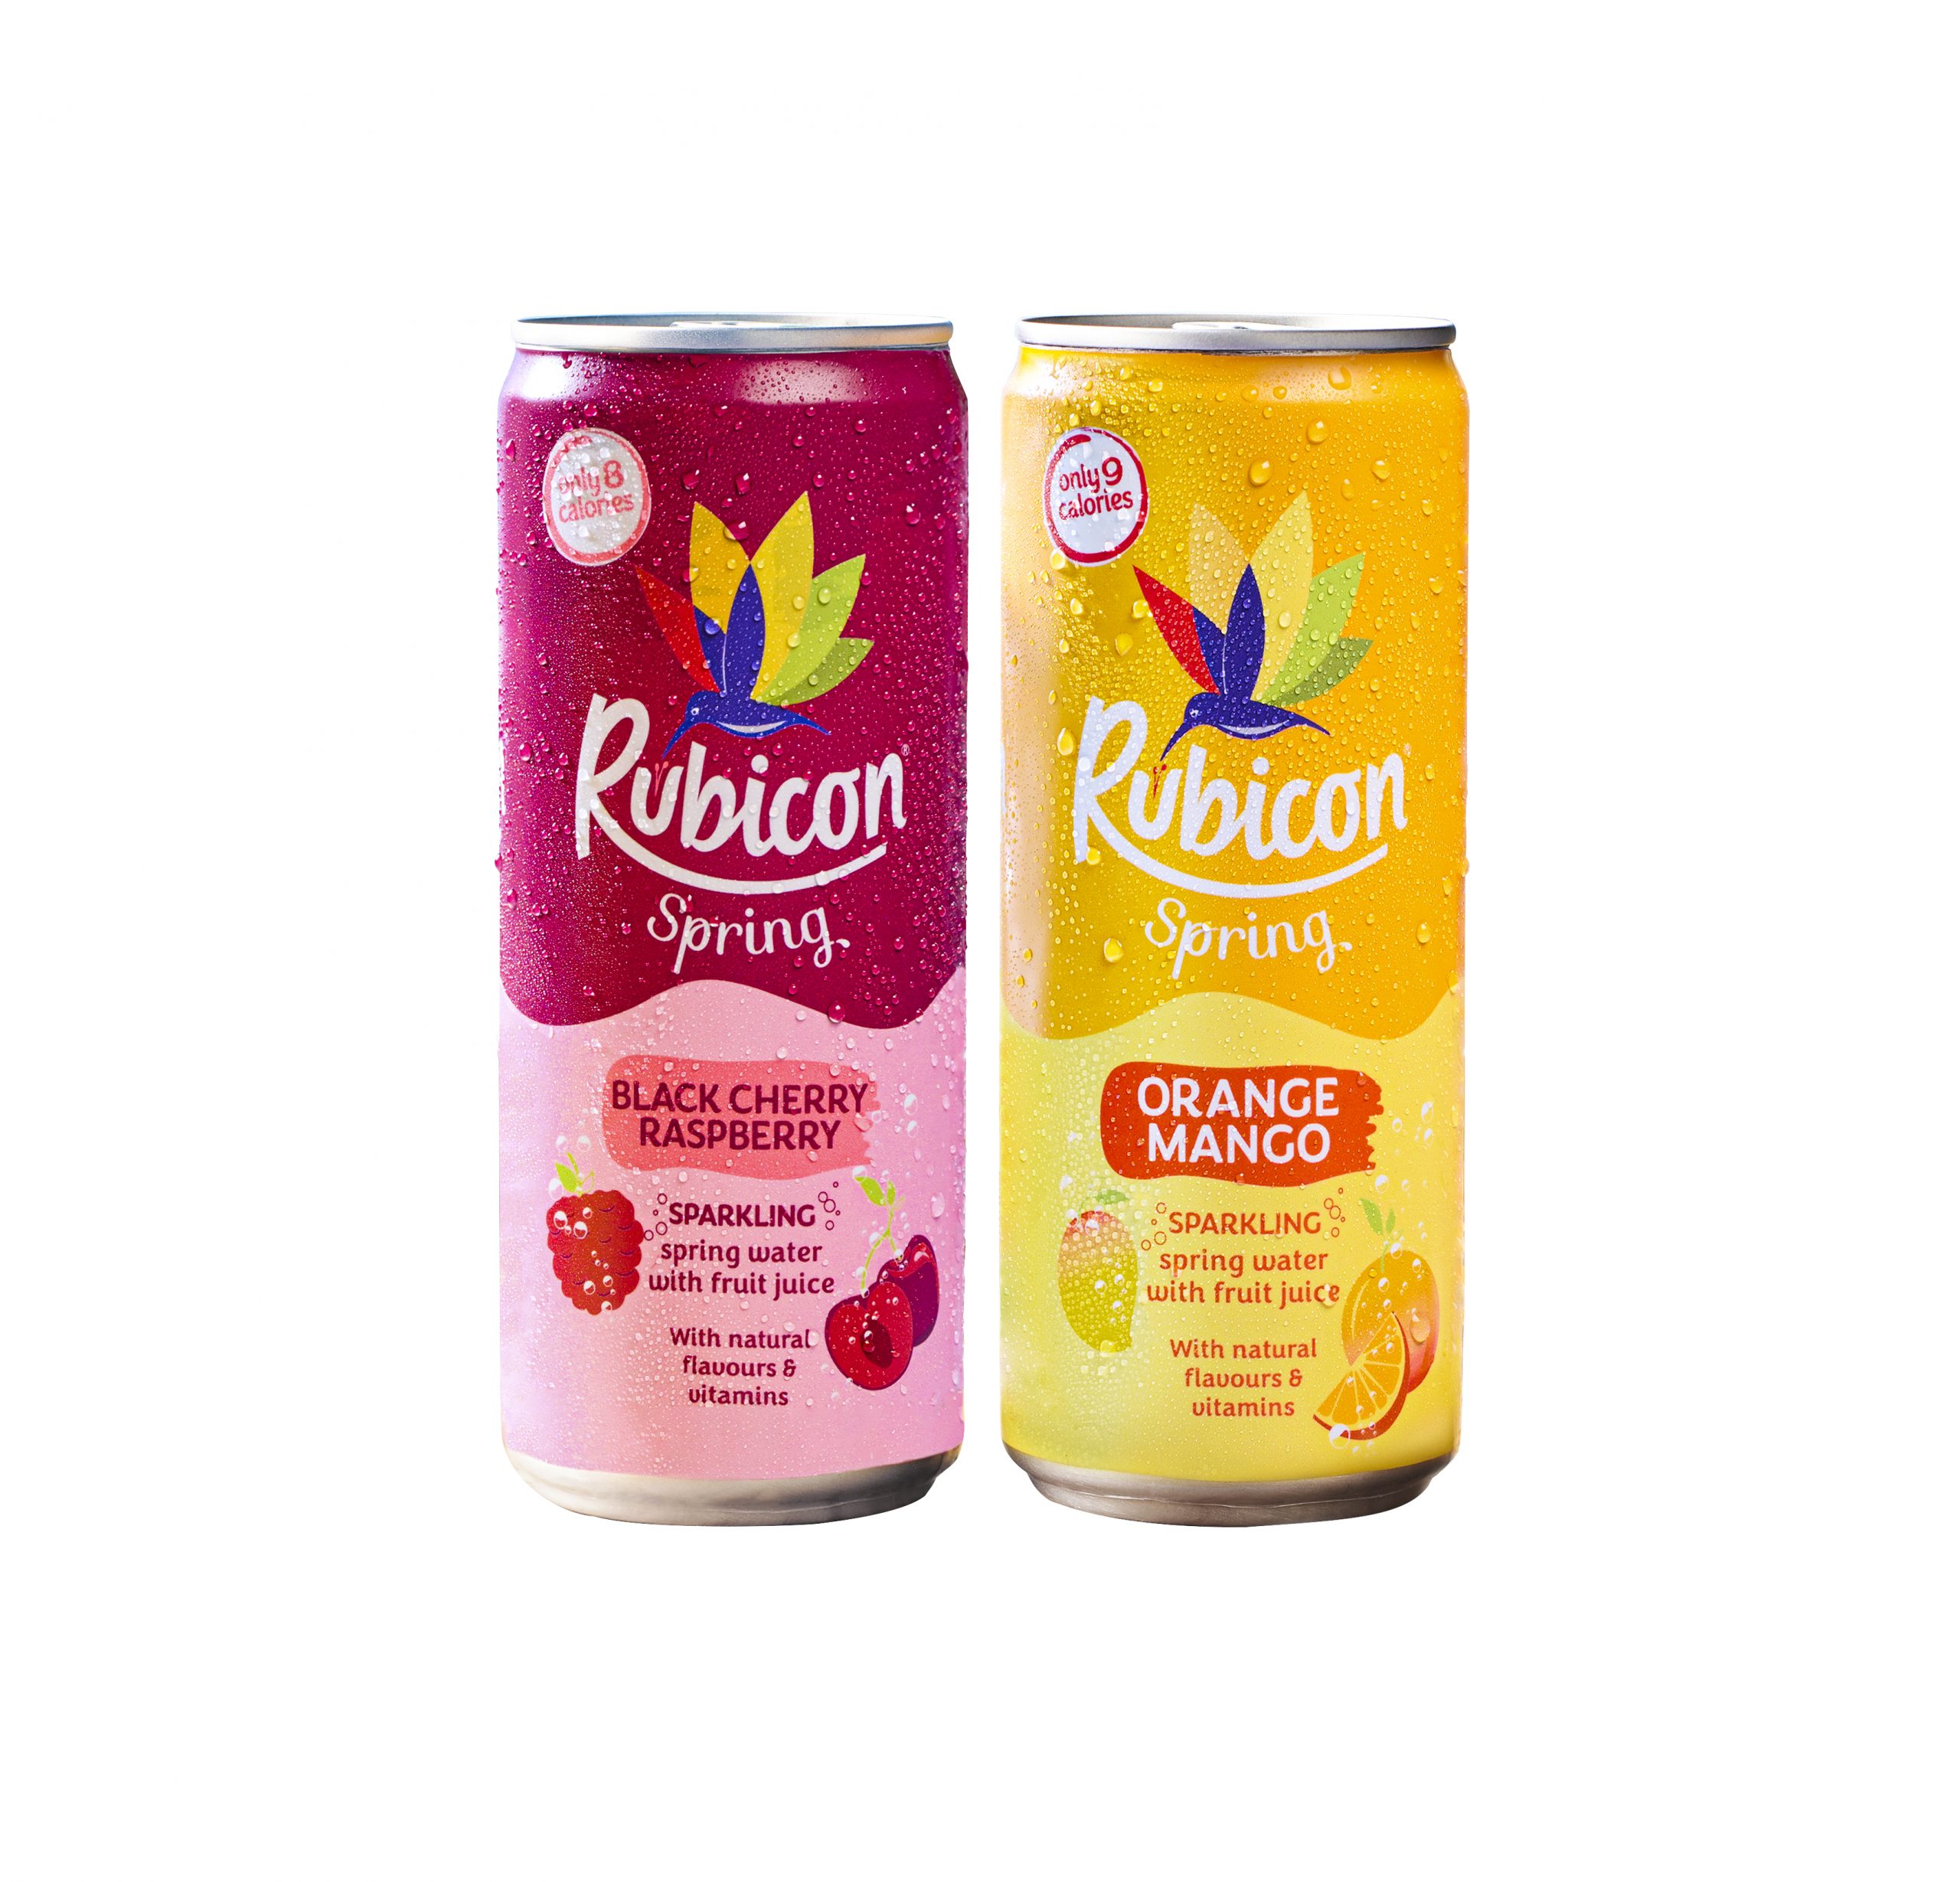 Rubicon Spring launches two new flavours in 330ml cans